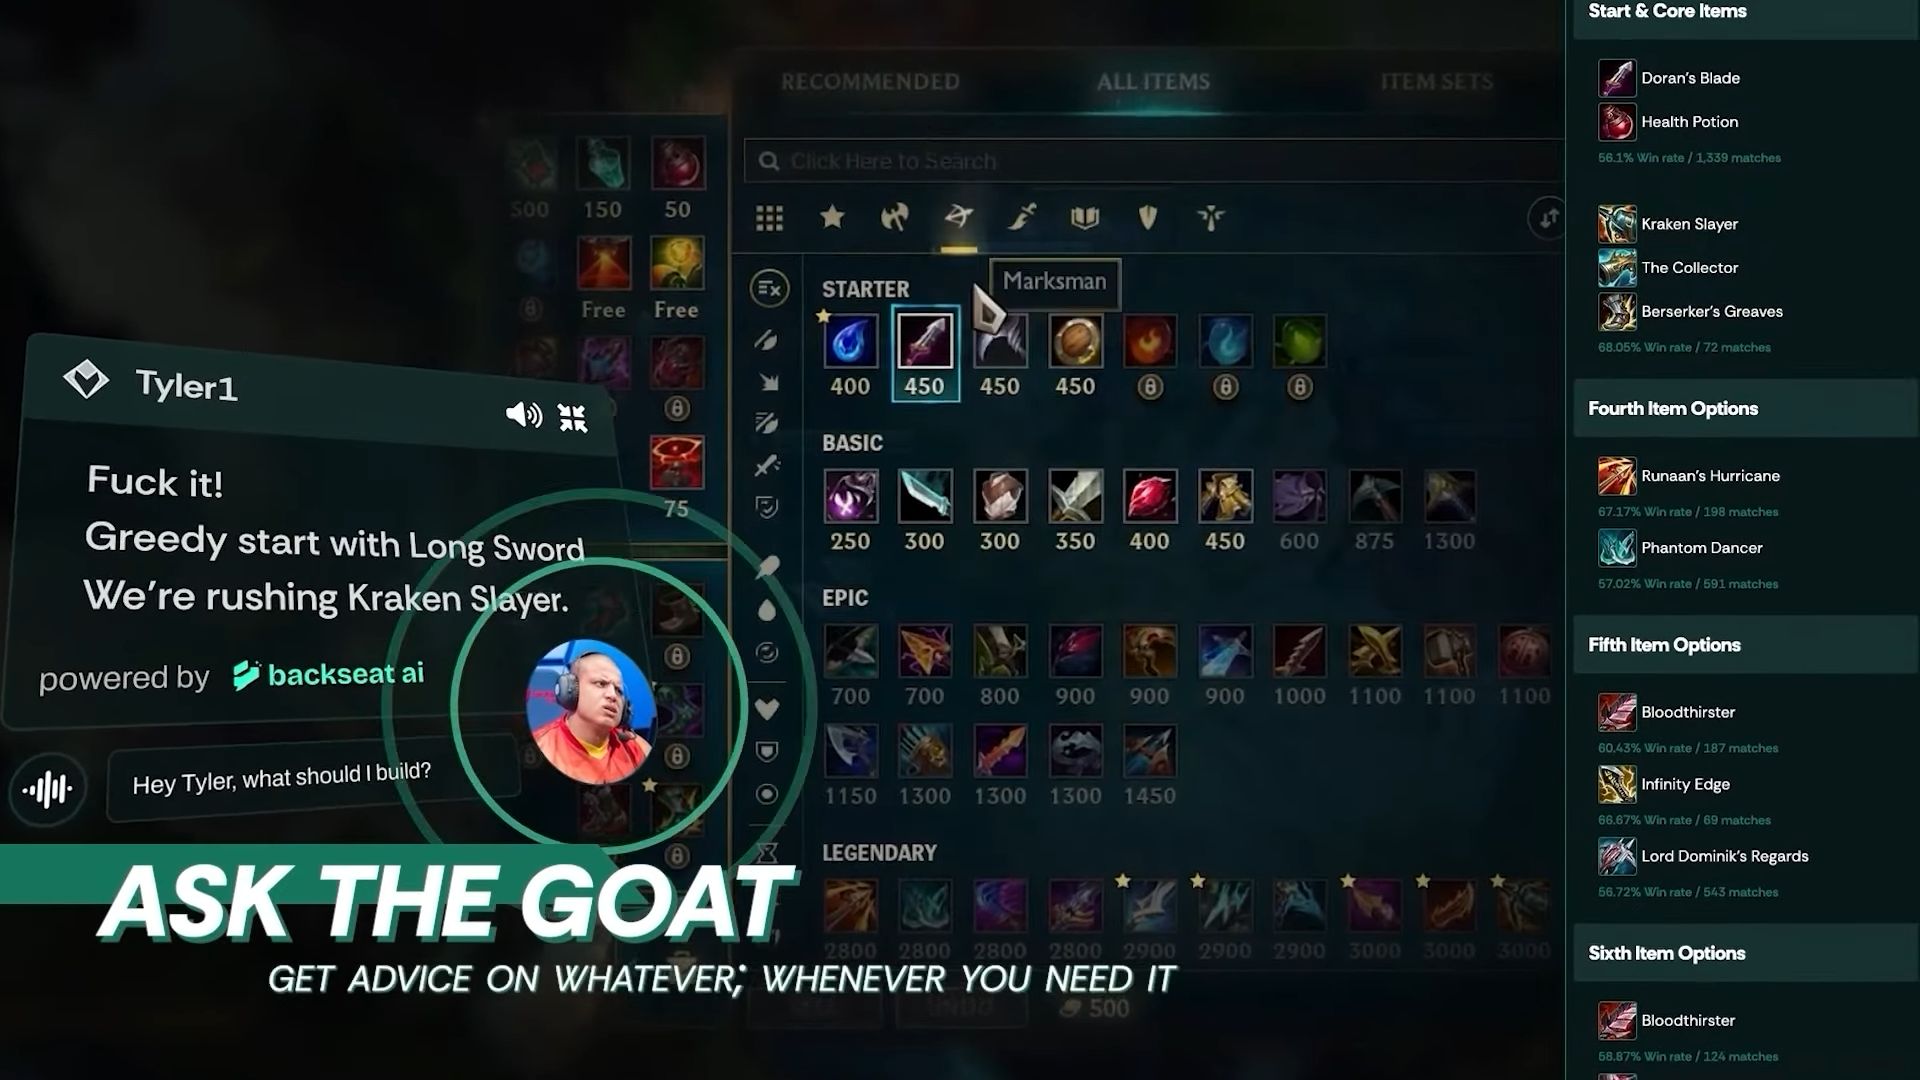 Backseat AI can help you destroy your opponents in League of Legends